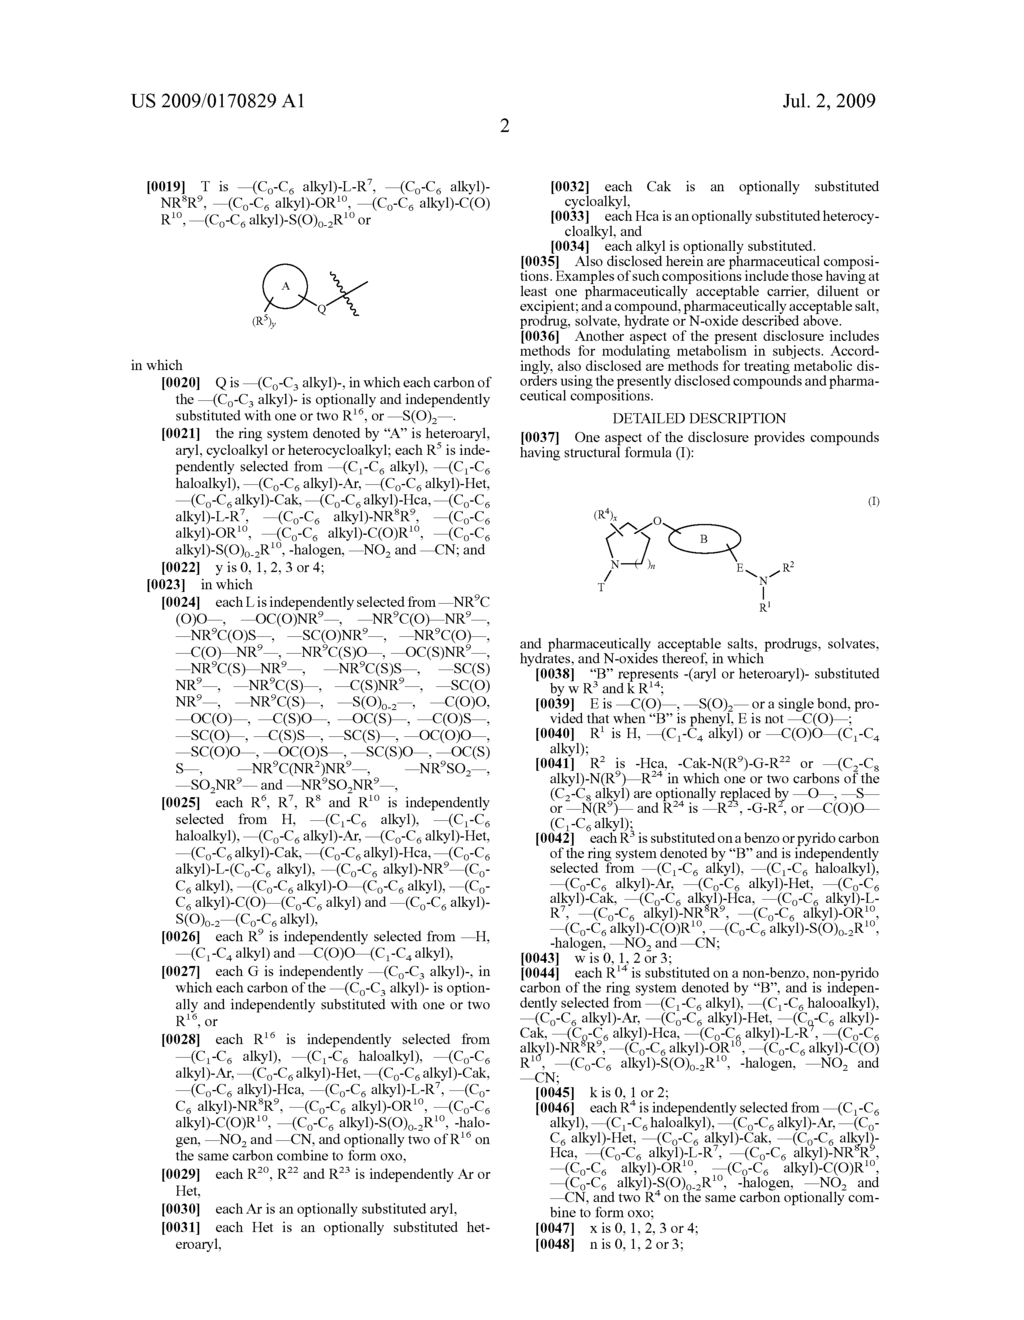 Carboxamide, Sulfonamide and Amine Compounds and Methods for Using The Same - diagram, schematic, and image 03